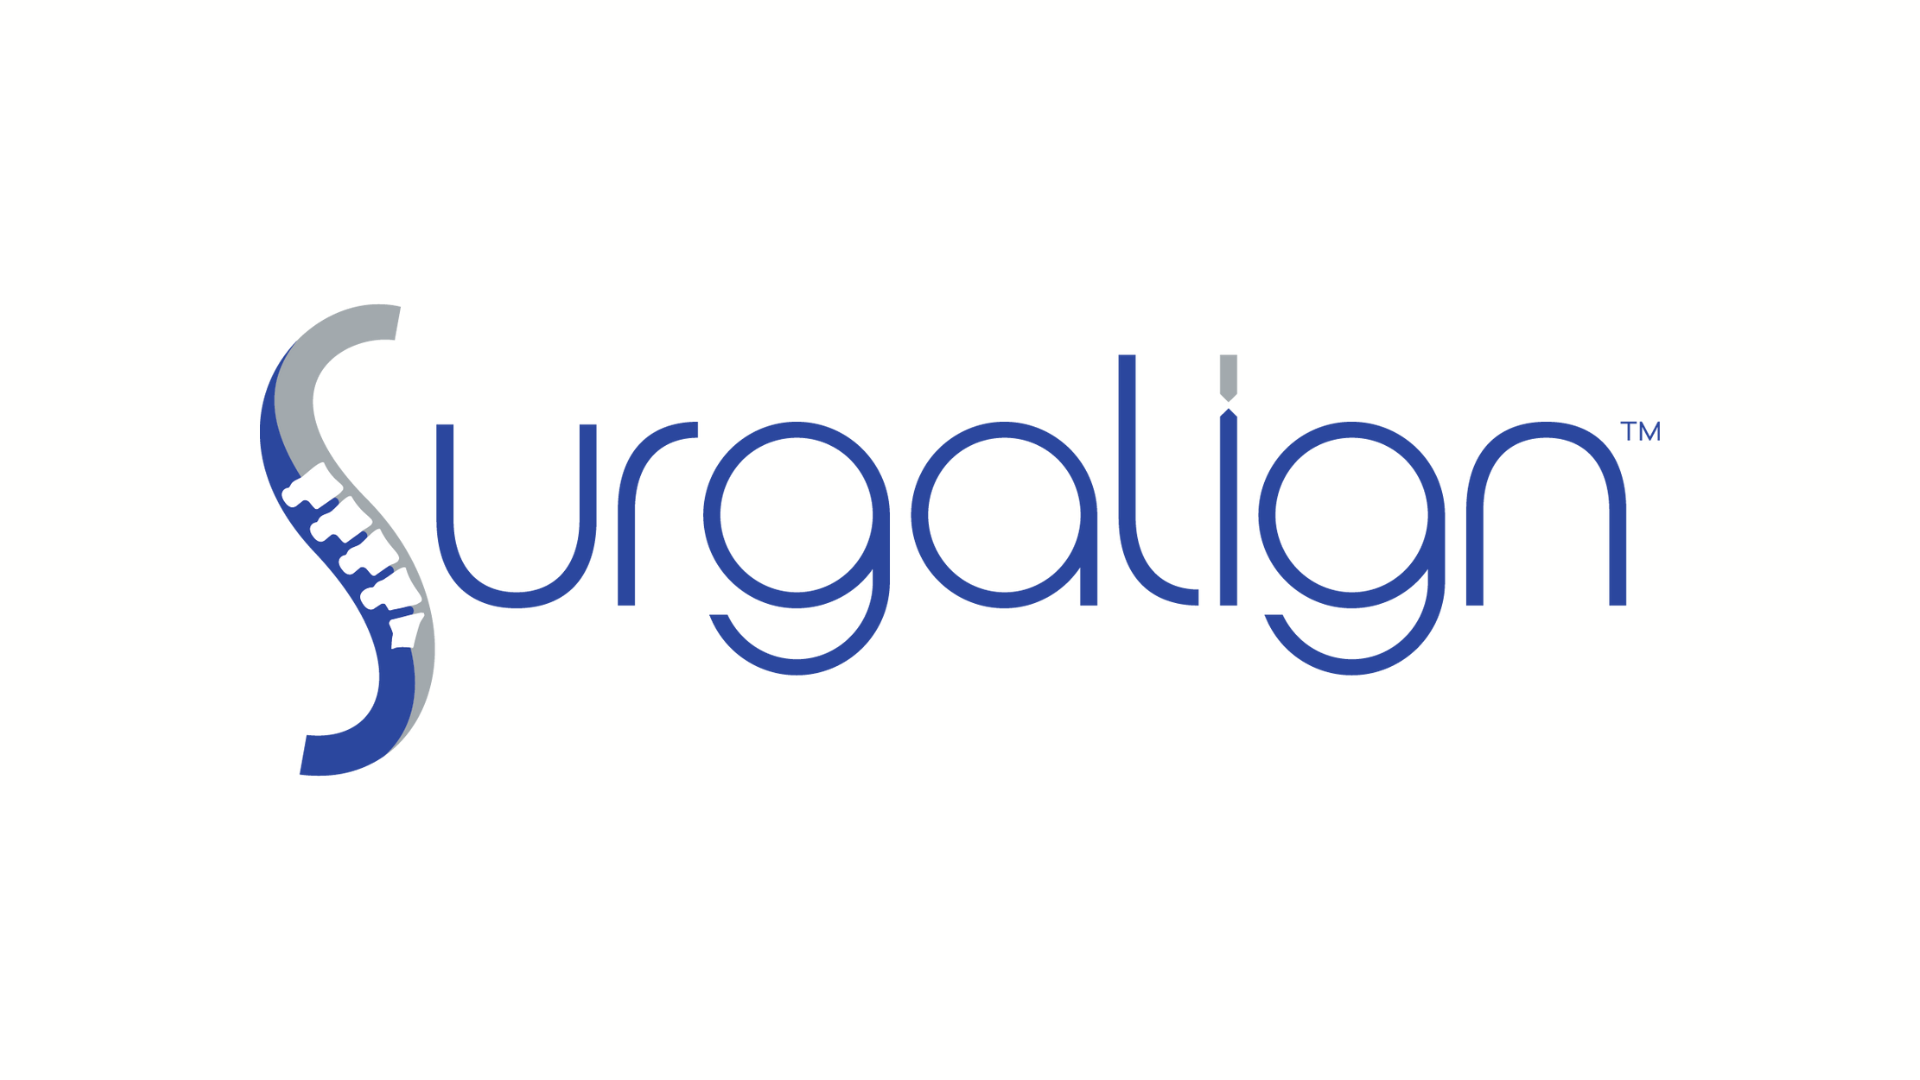 Surgalign announced the expansion of its Fortilink portfolio with the introduction of new interbody fusion devices with TiPlus technology and 3D printing